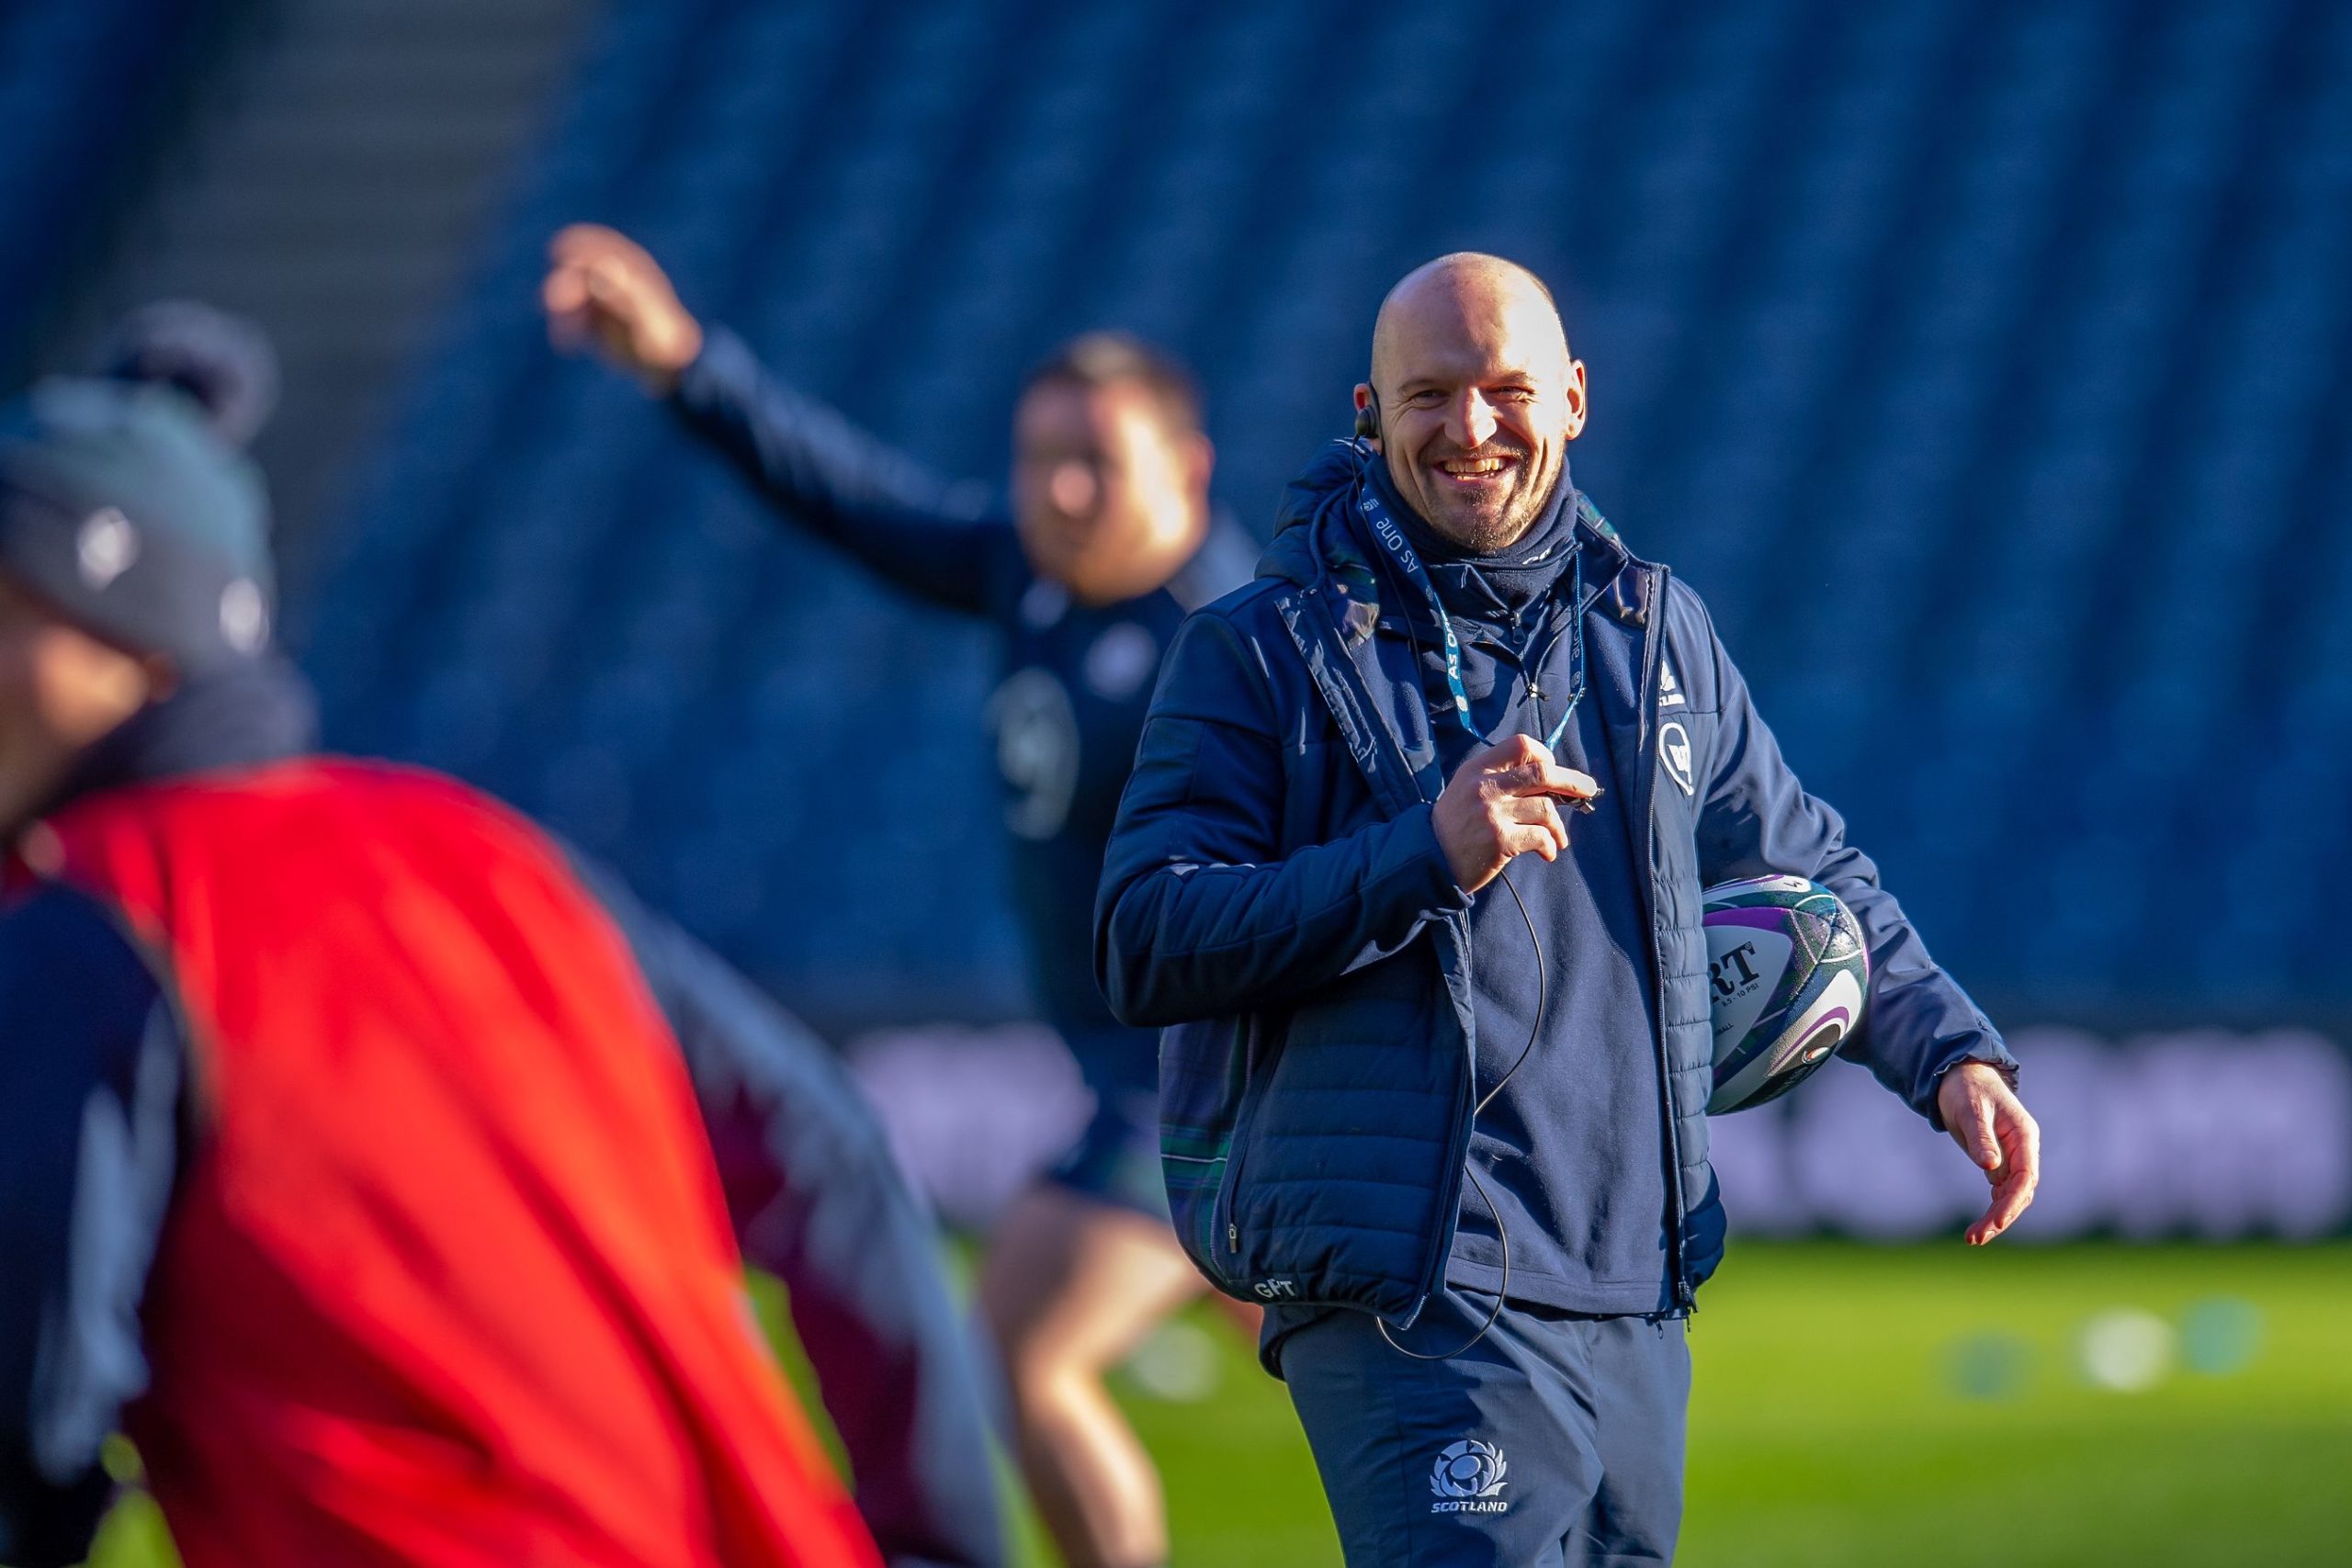 Scotland head coach Gregor Townsend was all smiles at the captain's run ahead of a crucial game for him against England.